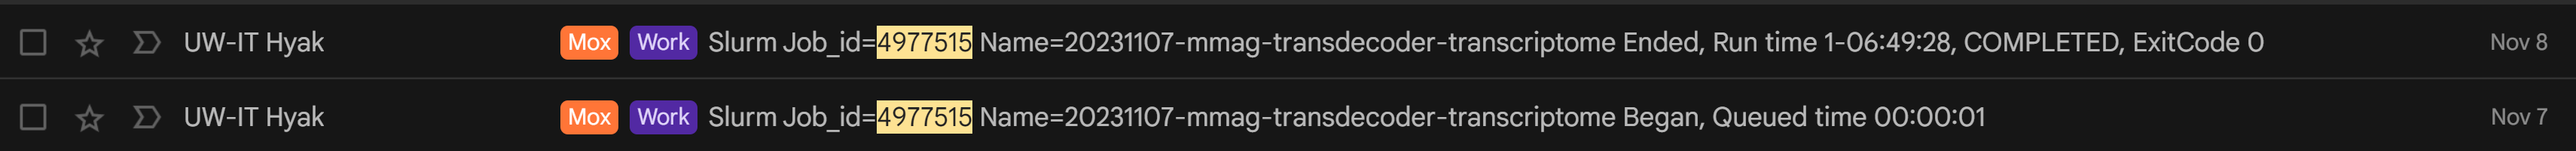 TransDecoder runtime for M.magister transcriptome assembly of 1 day, 6hrs 49mins, and 28secs